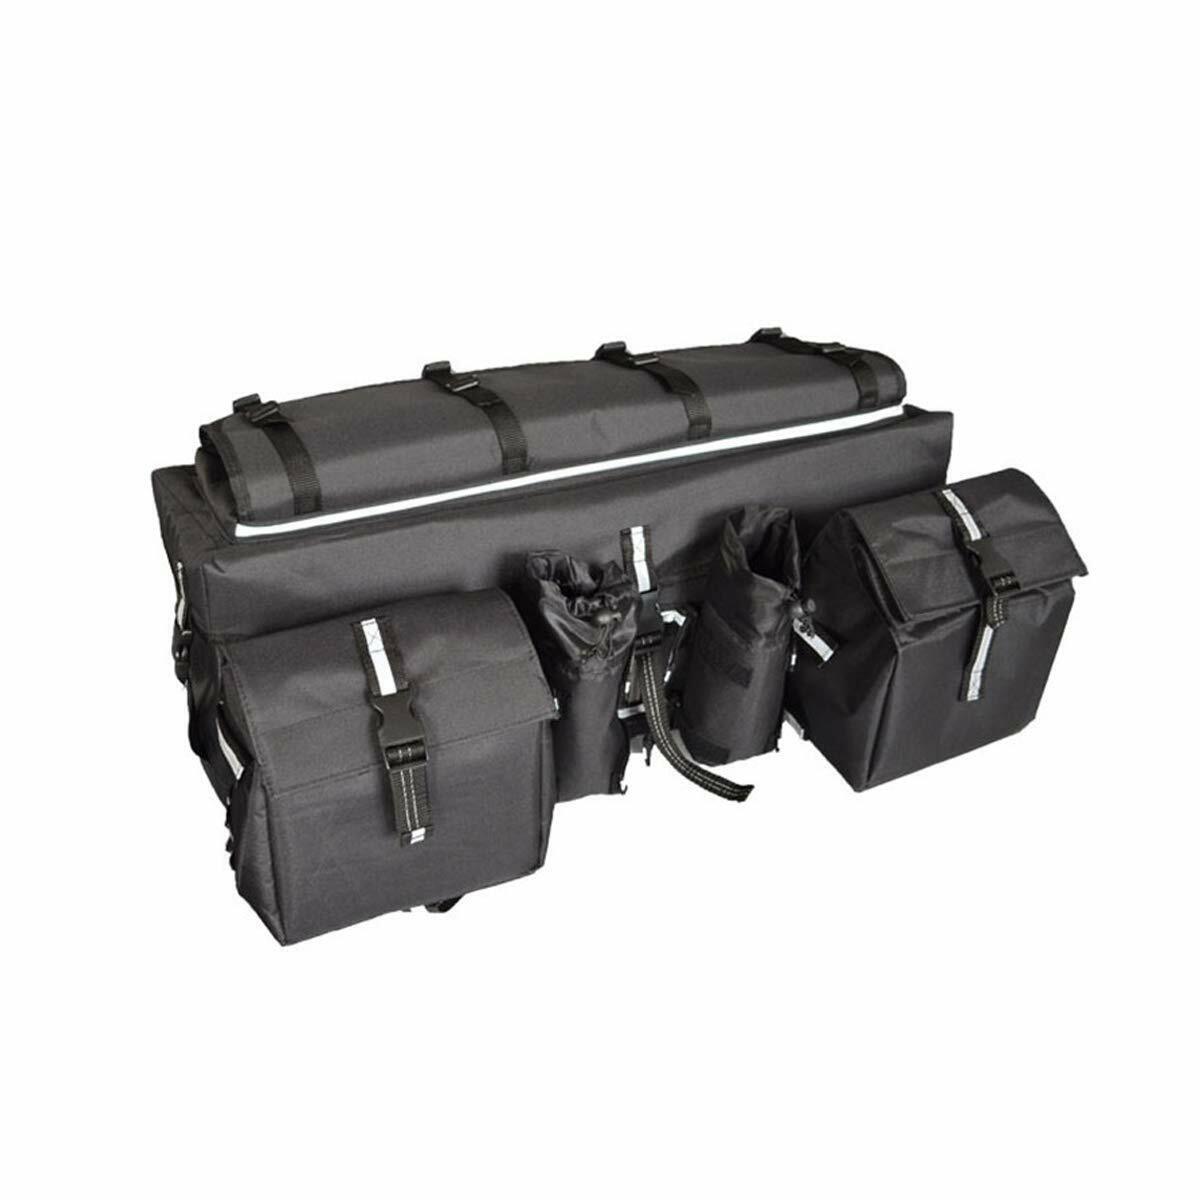 ATV San Diego Mall Cargo Bag Rear Rack Storage 600D Padded Challenge the lowest price Waterproof Refle